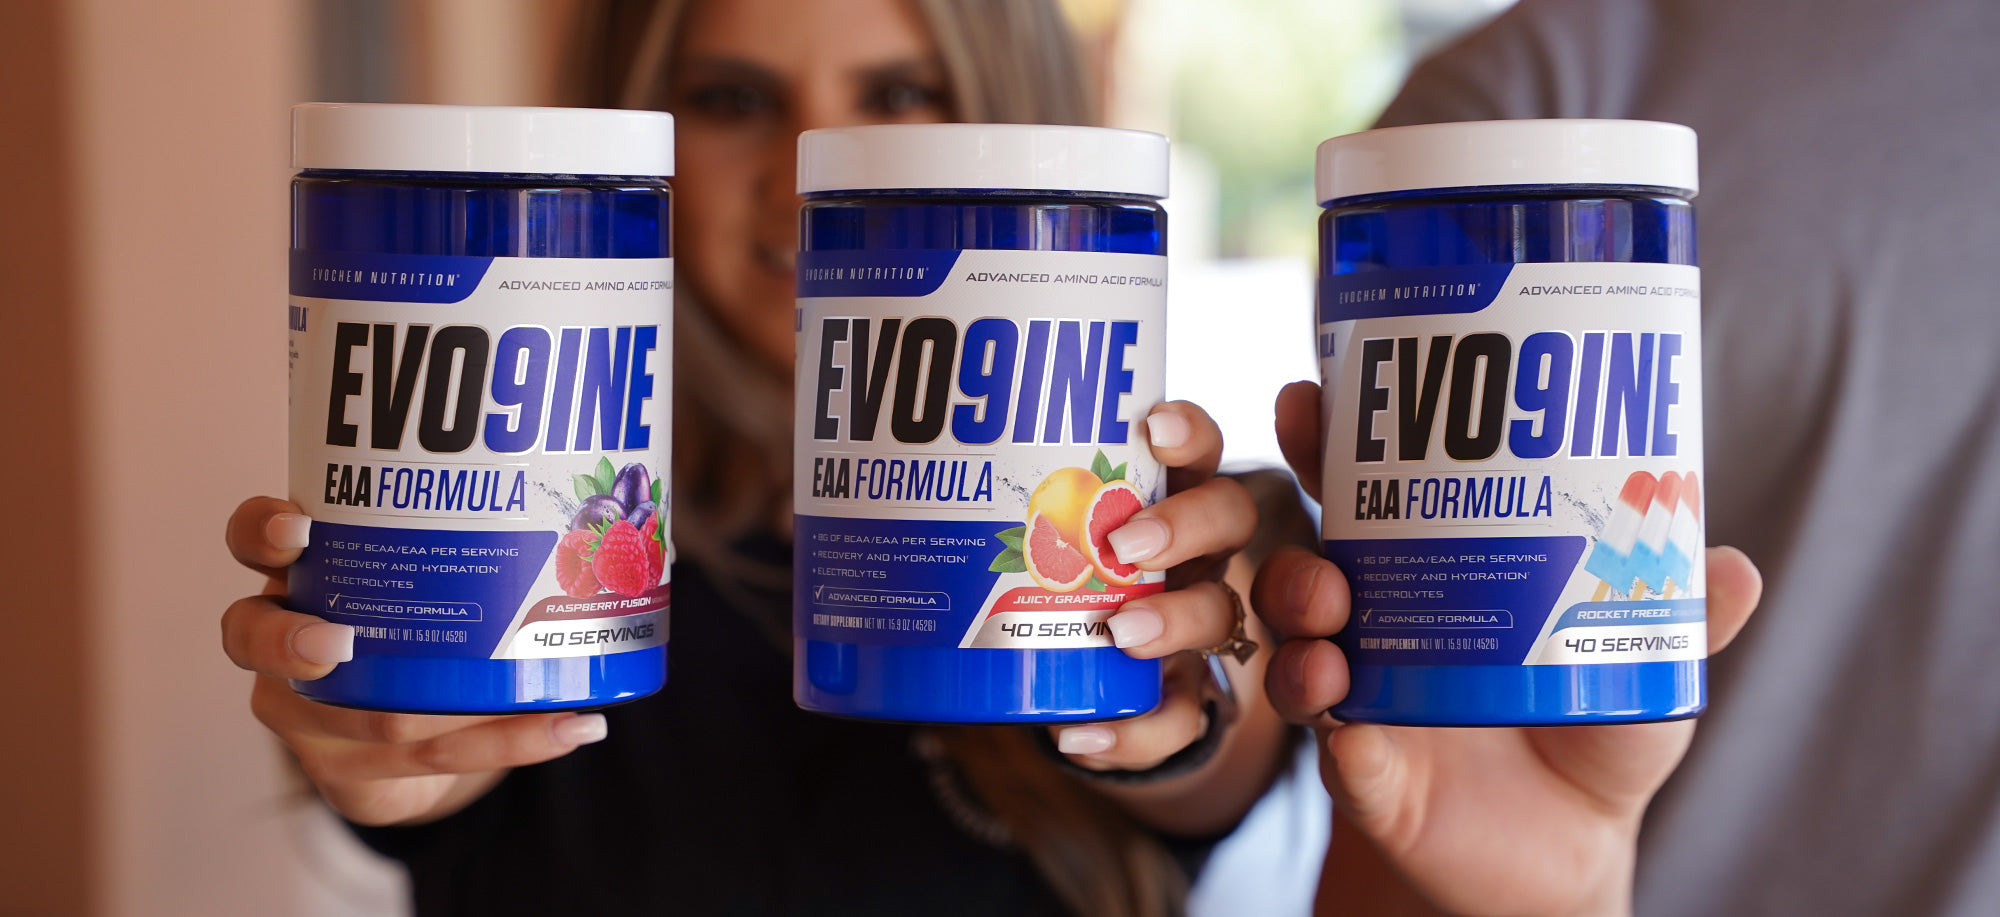 New EAA Formula Arrives Exclusively at NUTRISHOP®